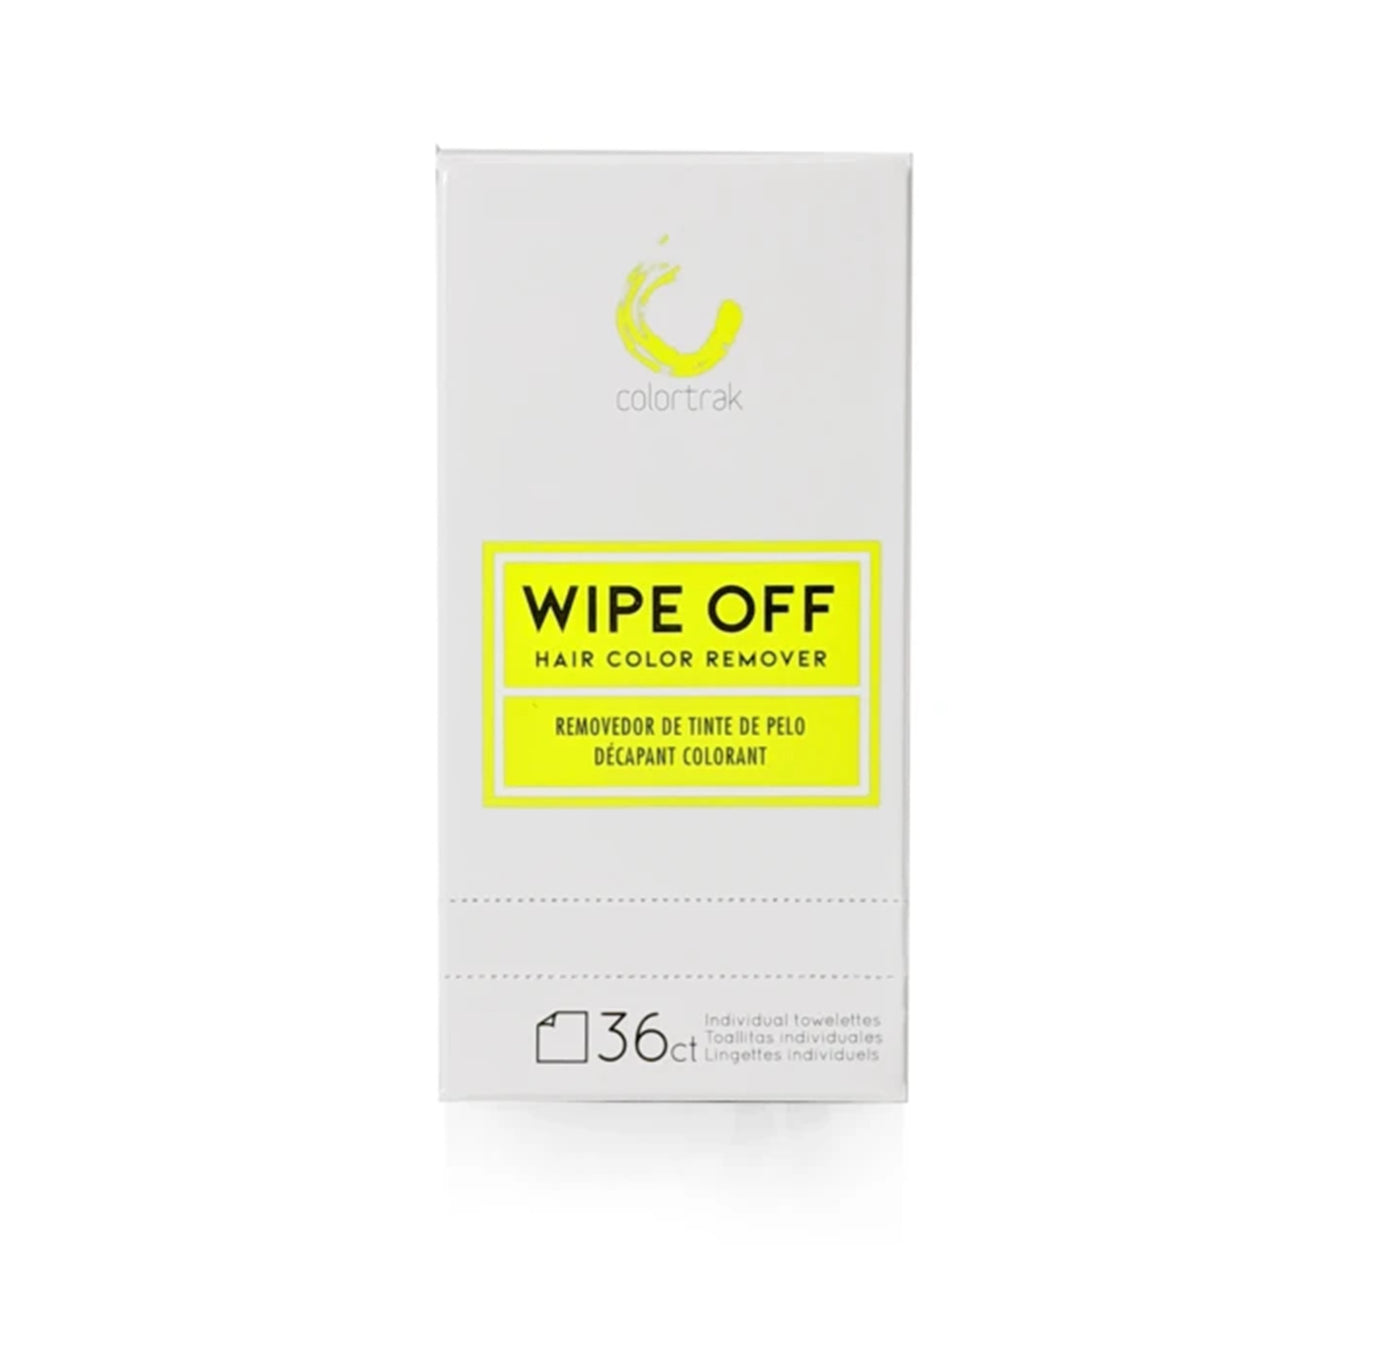 Wipe Off Hair Color Remover Wipes 36ct Individually Wrapped